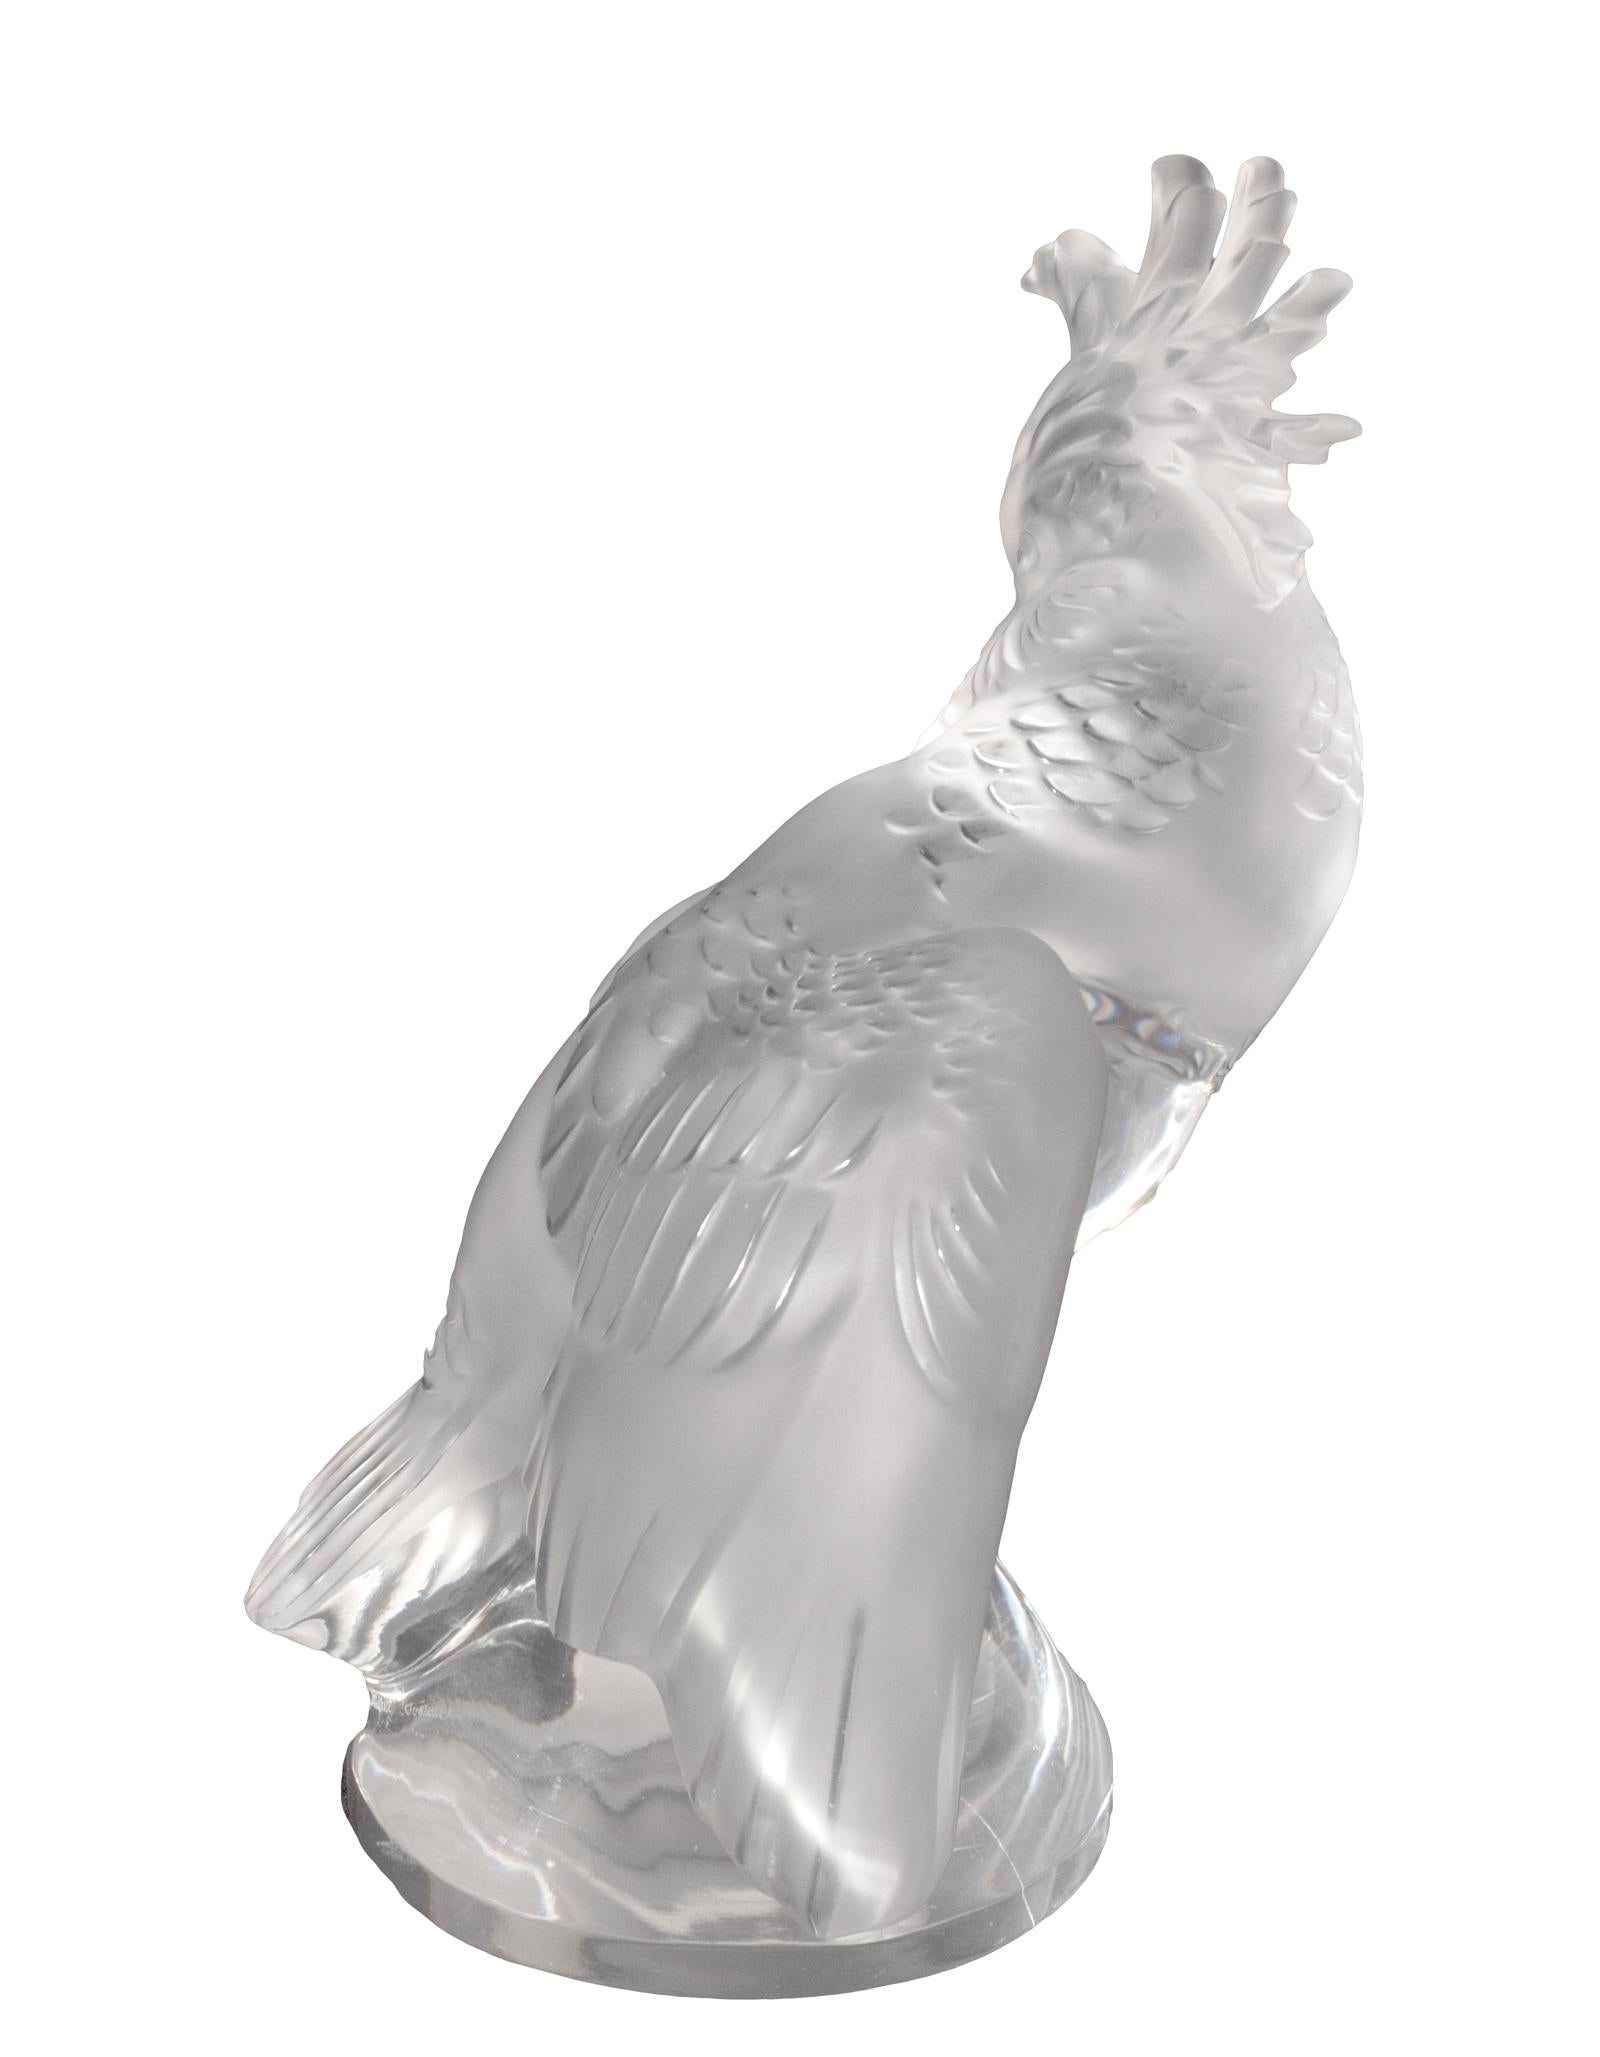 Frosted and clear crystal figure of a cockatoo on a conical perch, wings are partially spread and his head is turned back; etched signature reads 